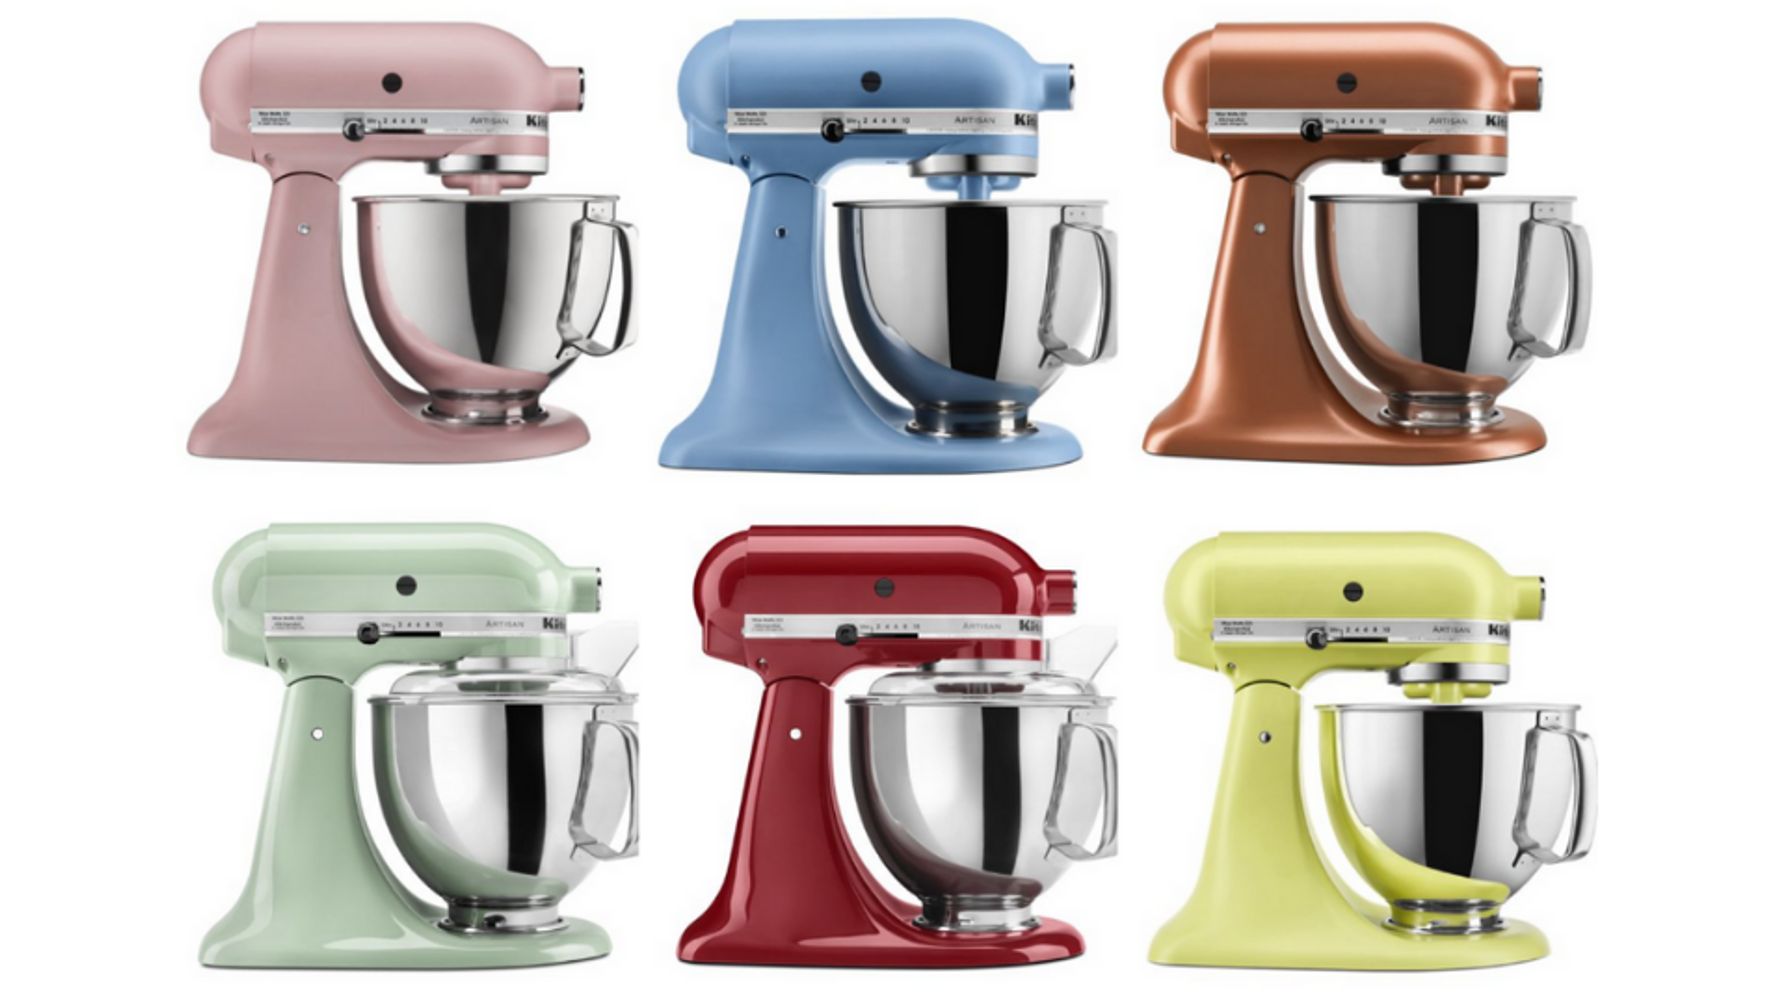 Most Popular Color Of KitchenAid Stand Mixer In Every State | HuffPost Life